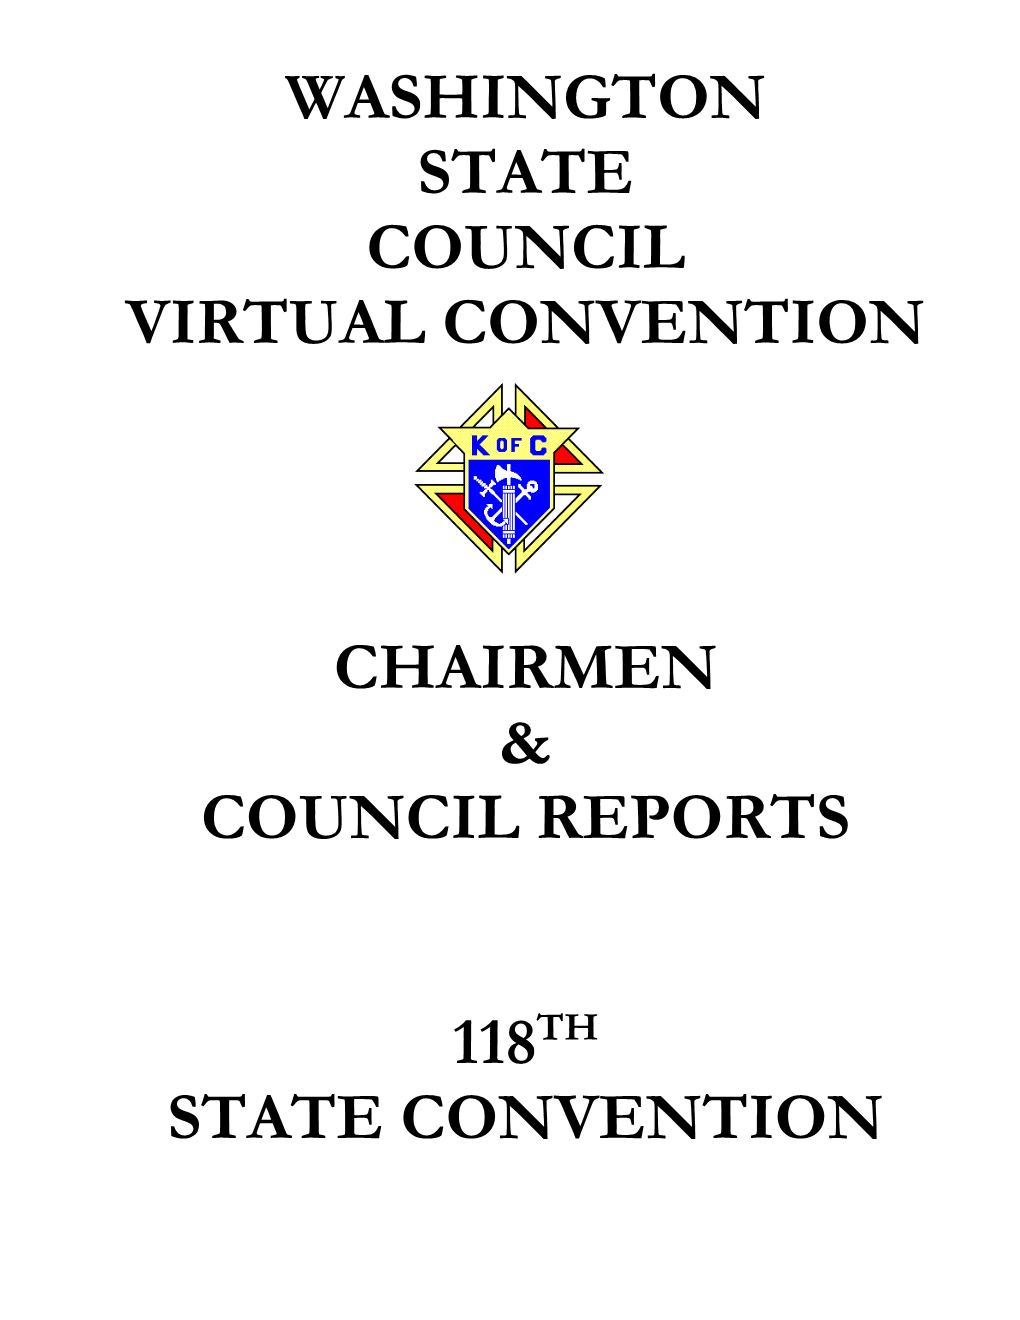 DD, State Chairman and Council Reports